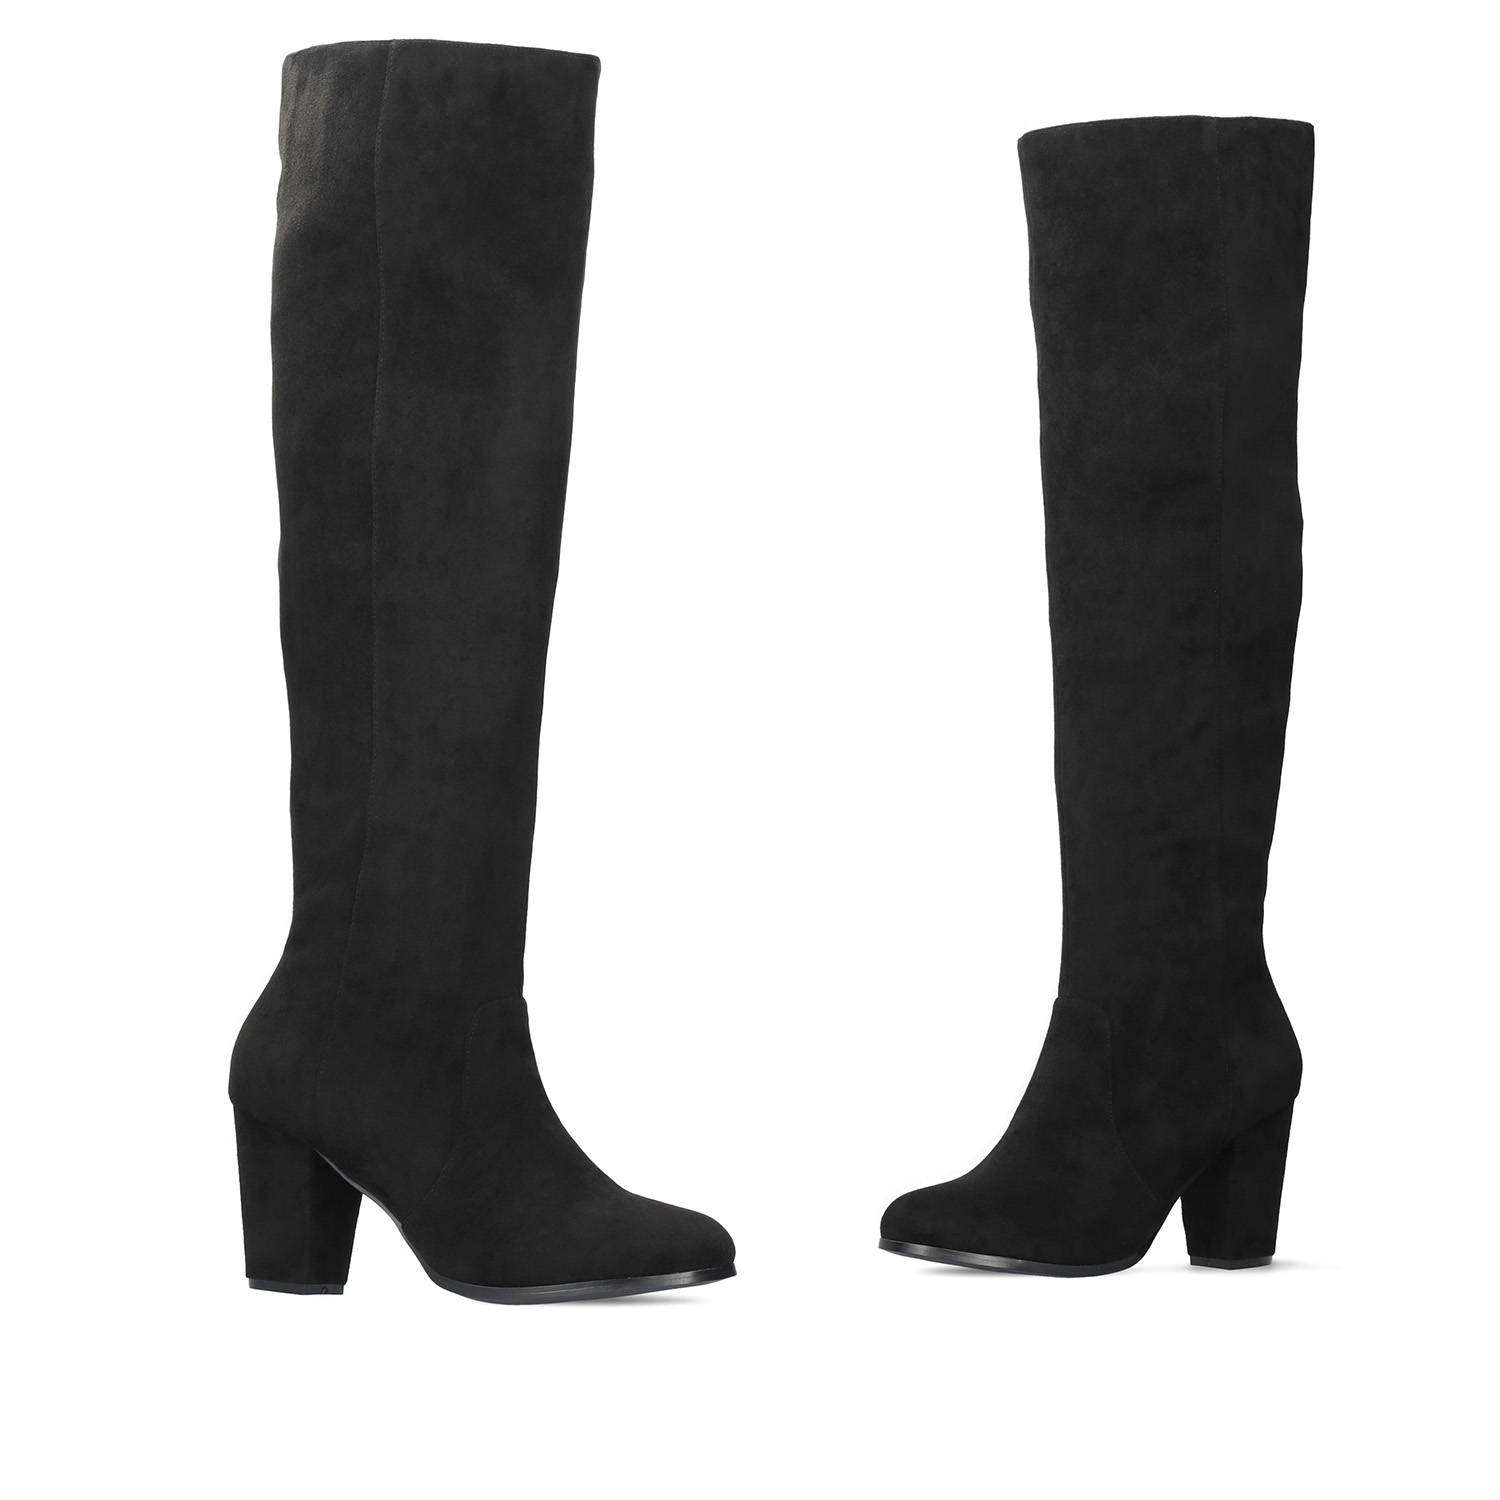 Heeled knee-high boots in black faux suede. 